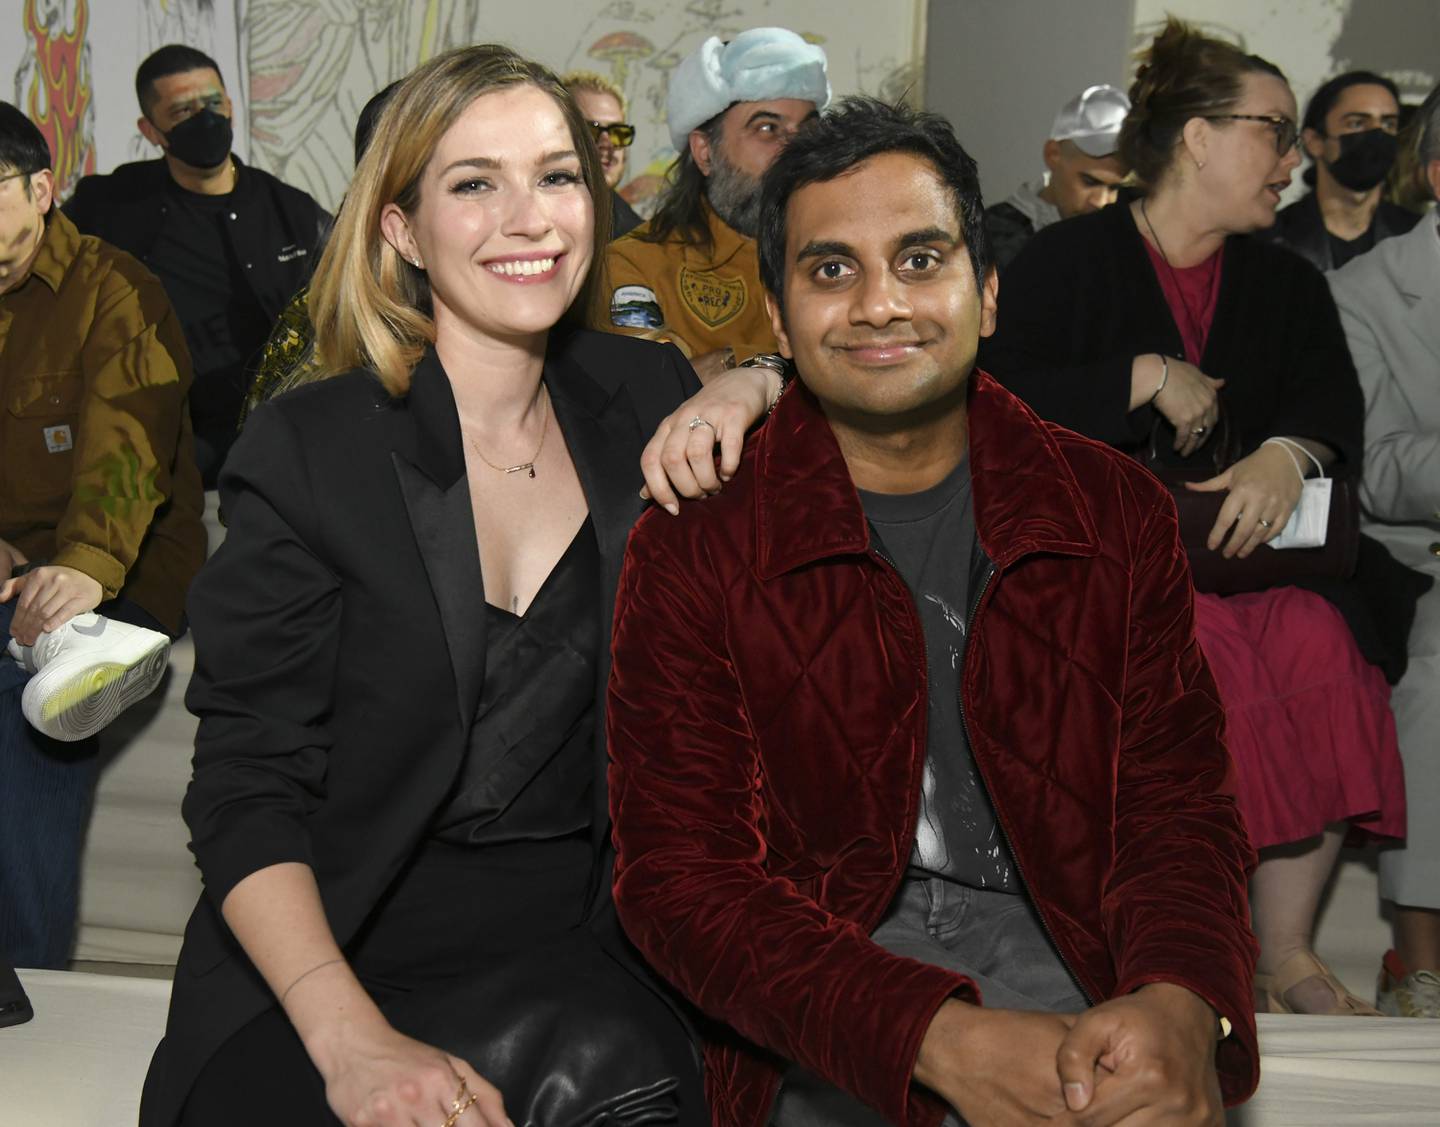  Serena Skov Campbell, left, and Aziz Ansari at a fashion show in February 2022 in Los Angeles. Photo: Getty Images/AFP